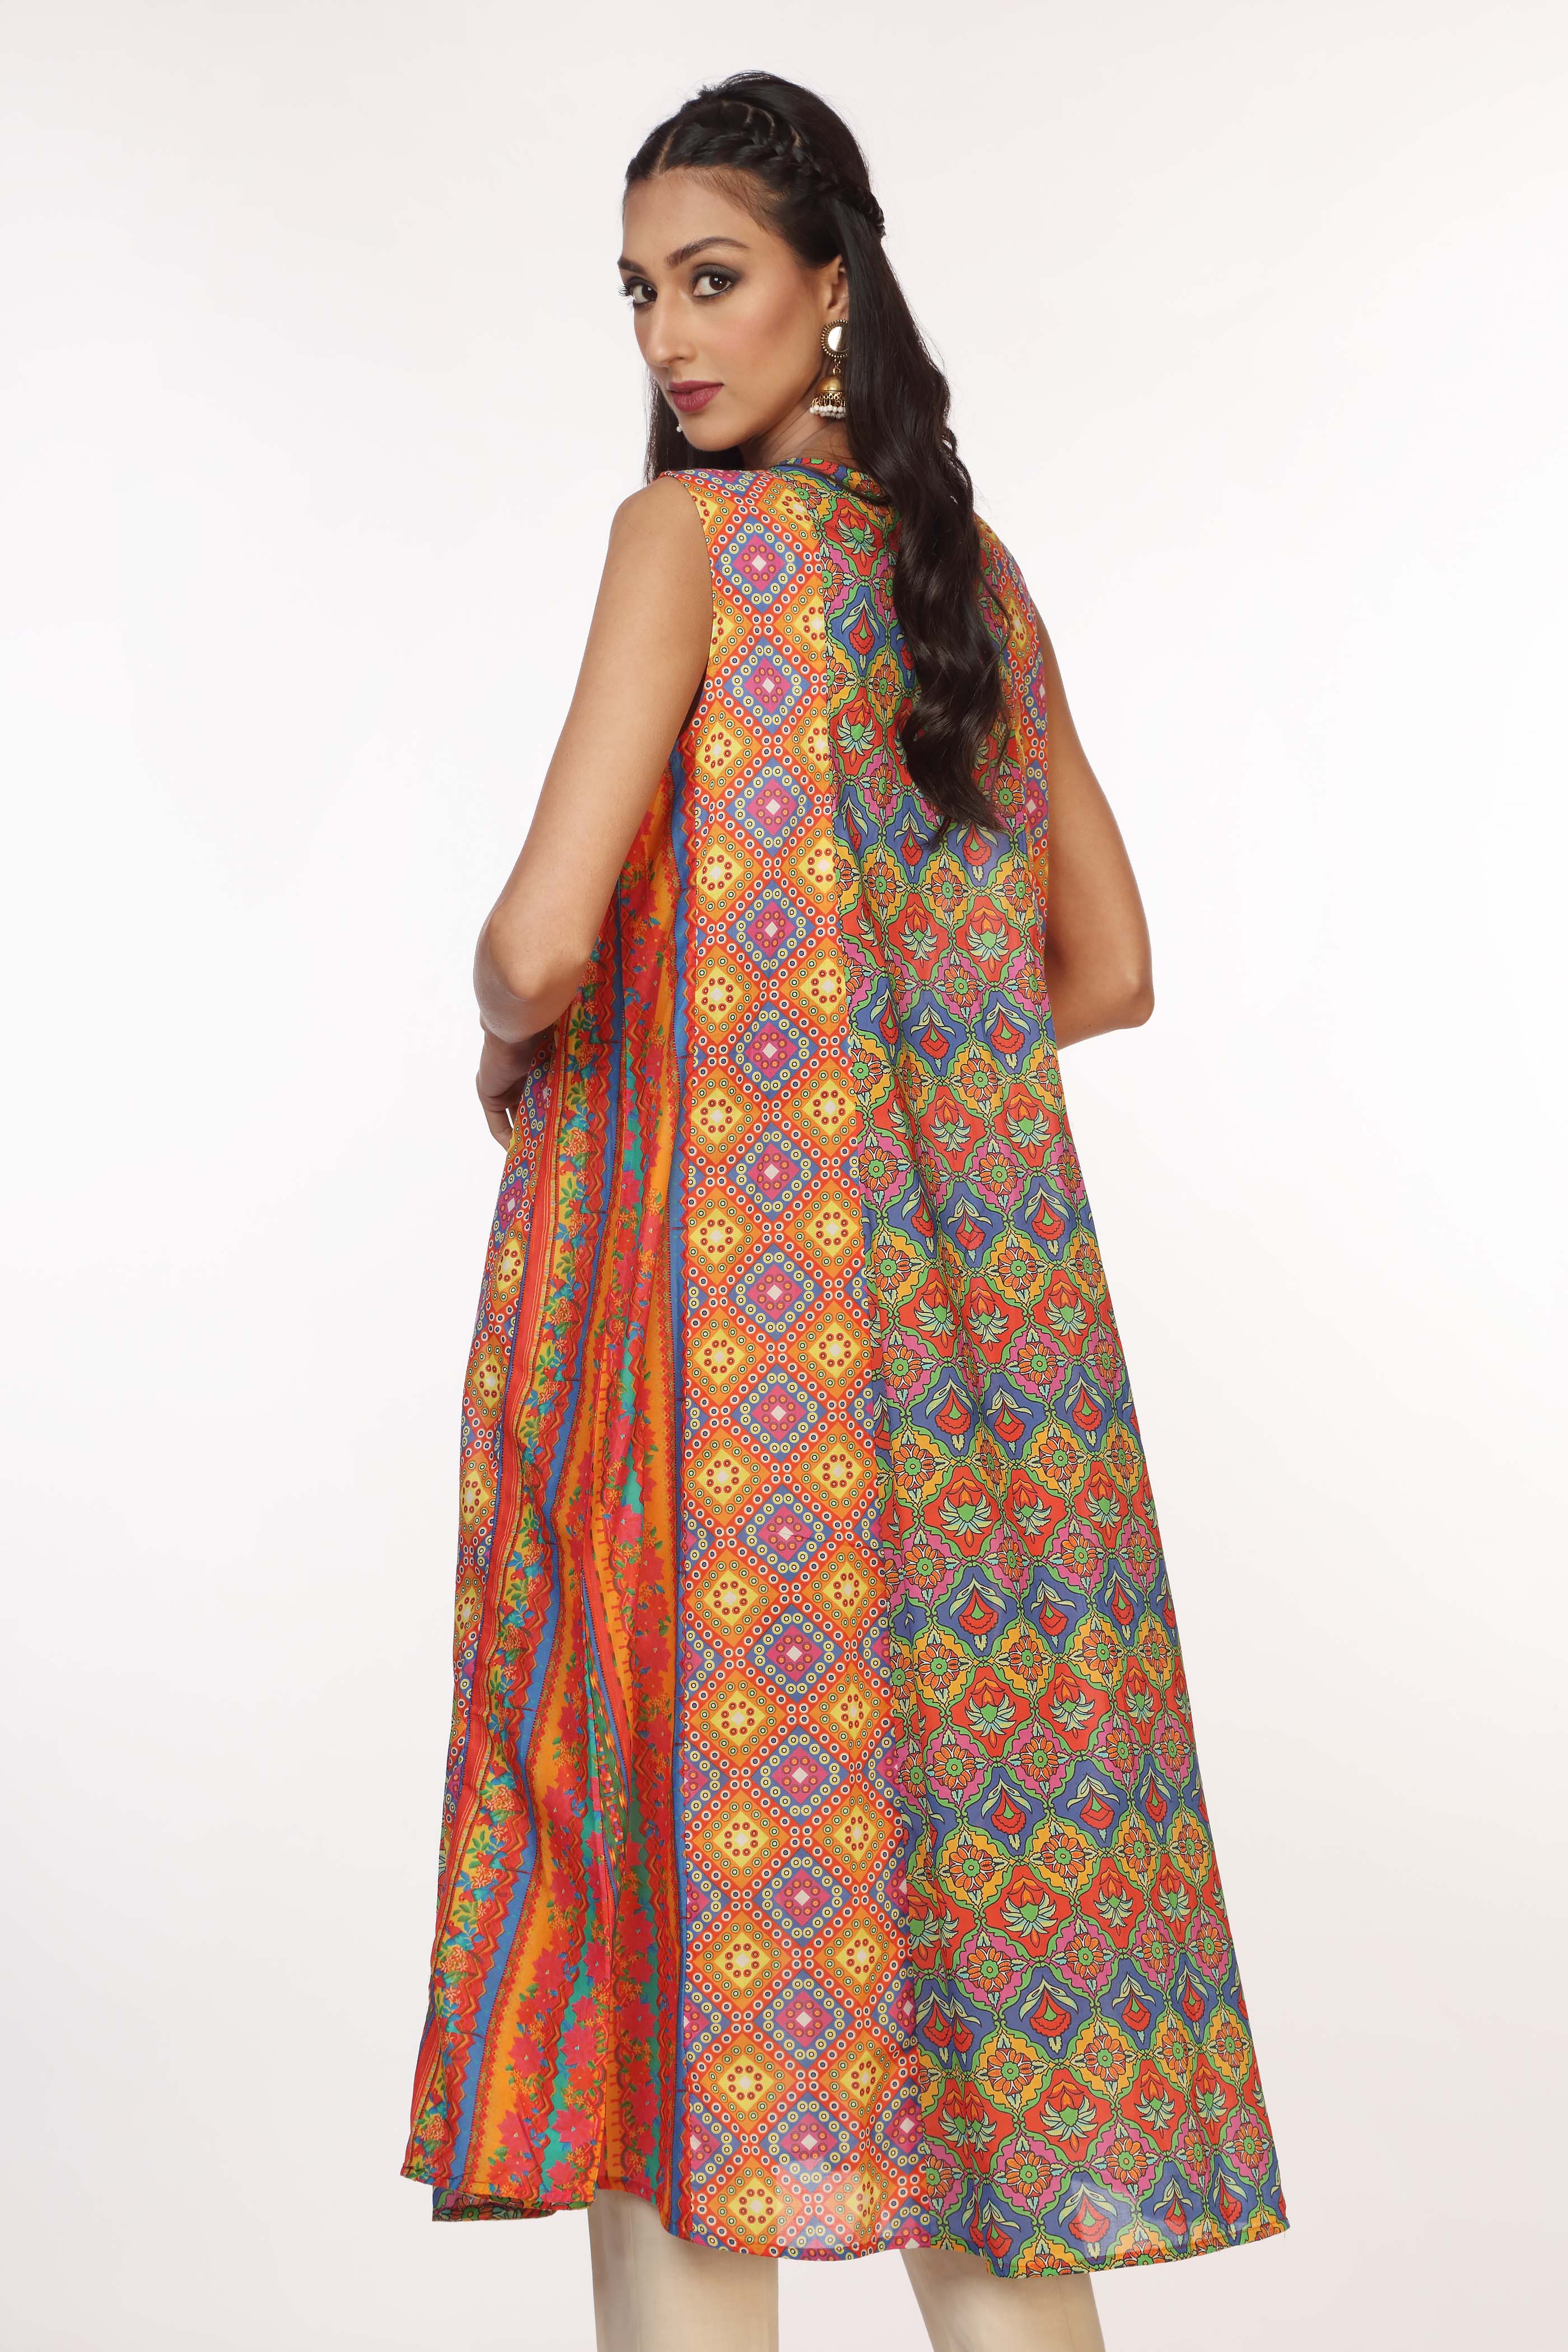 Moroccan Jaal in Multi coloured Printed Lawn fabric 3